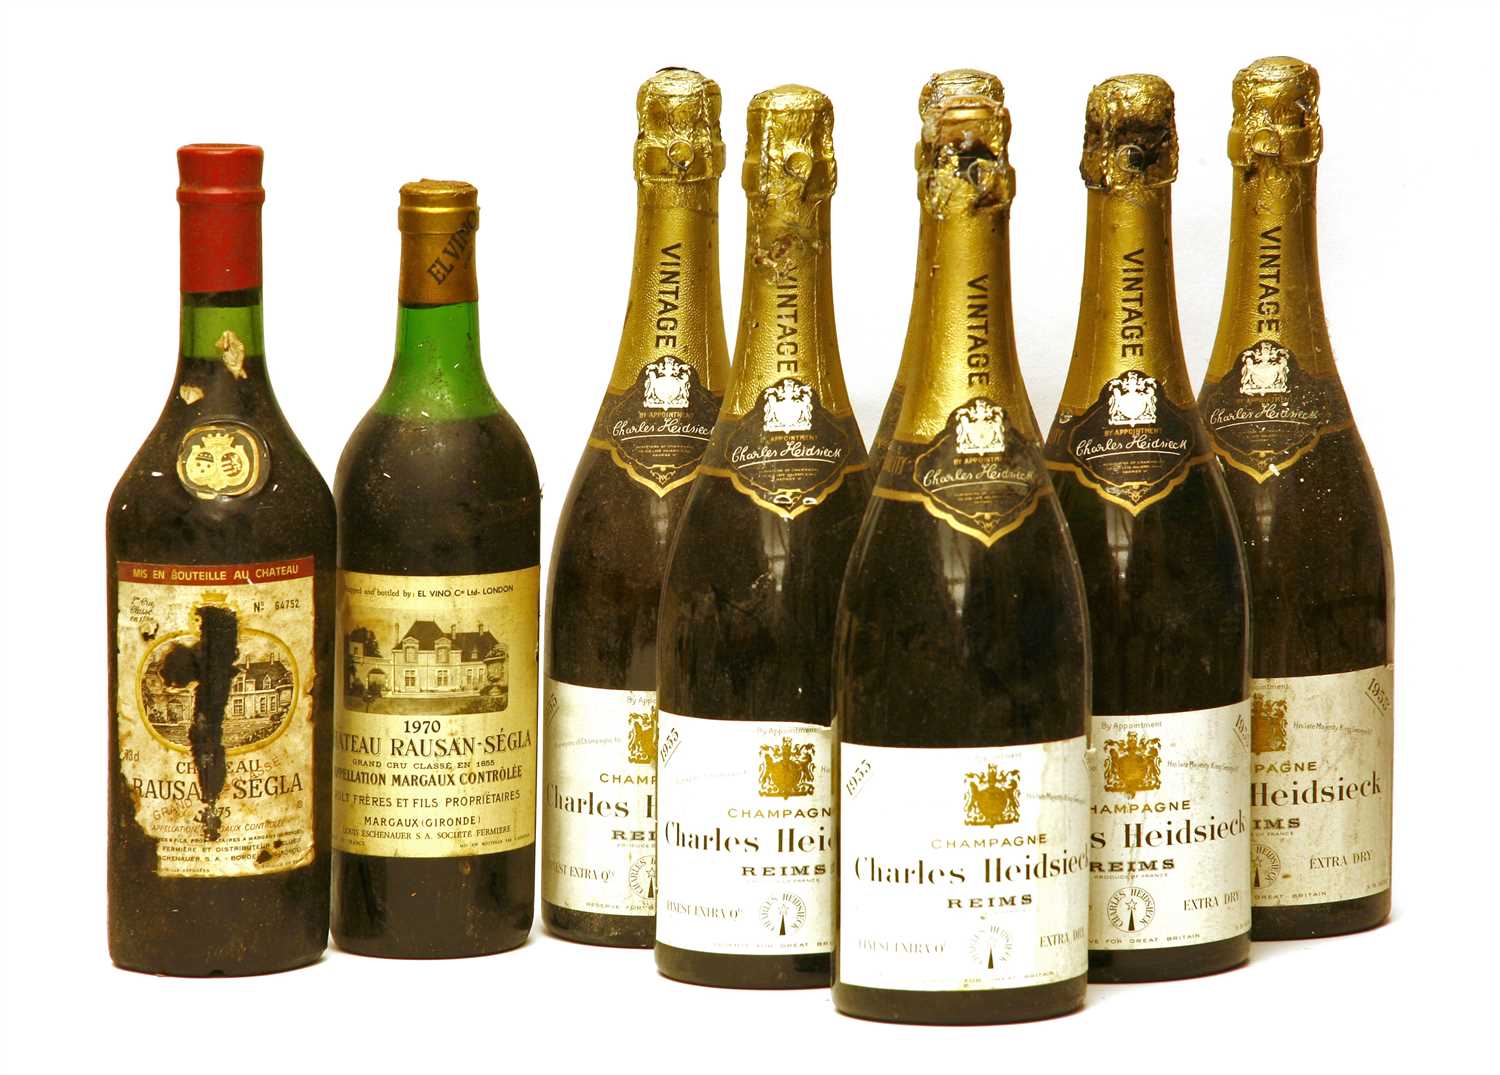 Lot 117 - Charles Heidsieck, 1955, six bottles and Ch Rausan-Ségla, 1970 and 1973, total eight bottles